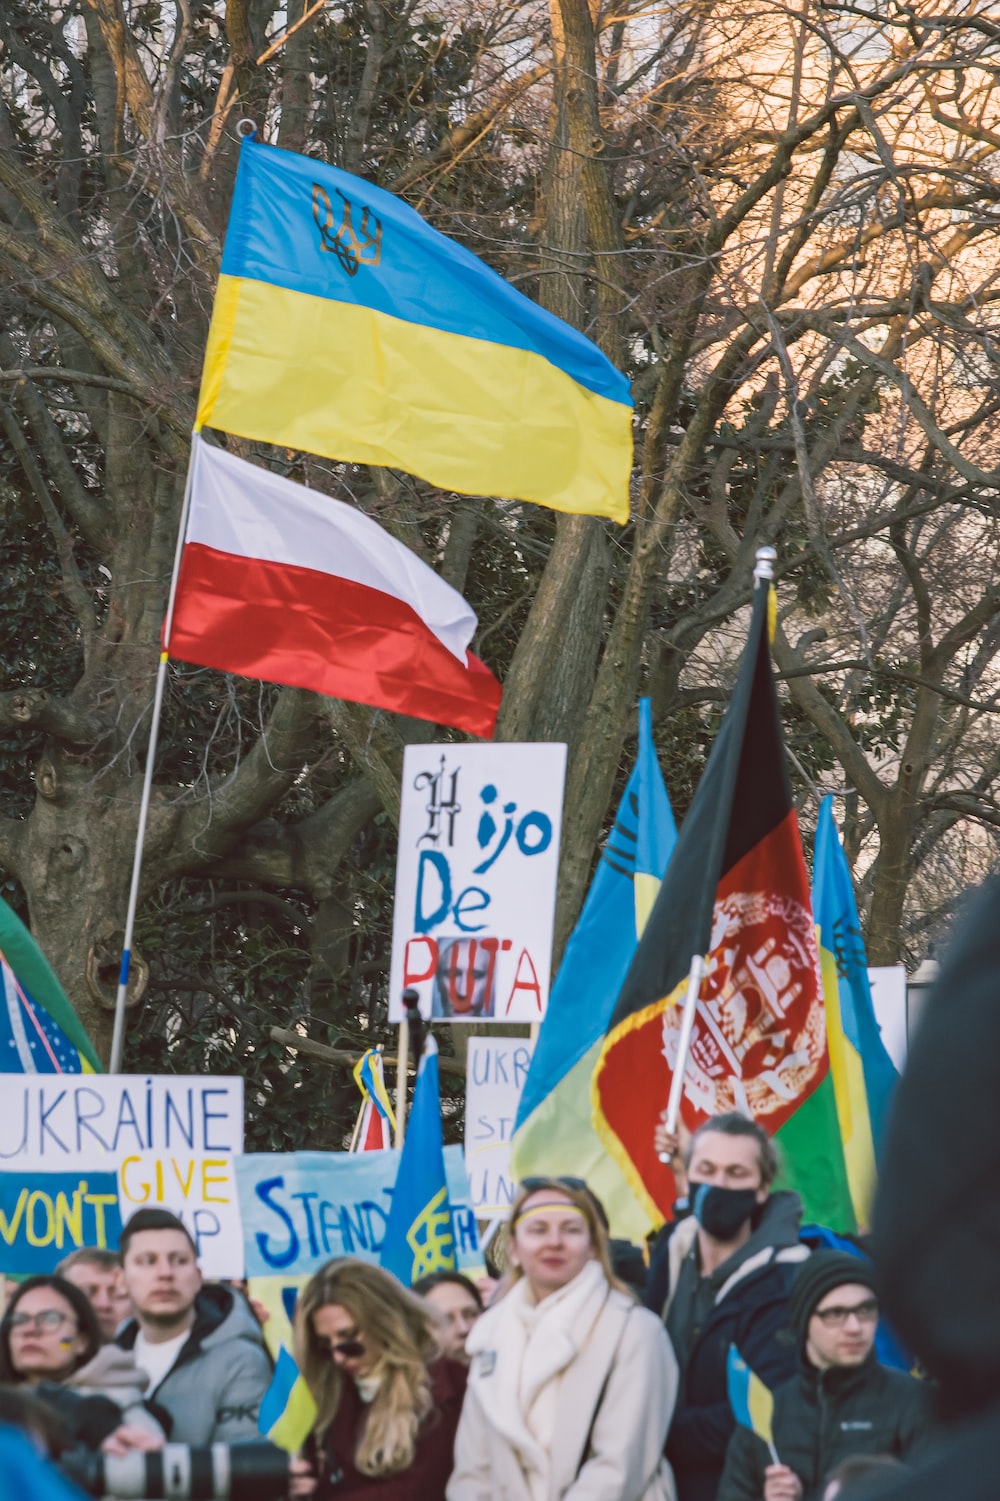 a group of people holding flags and banners